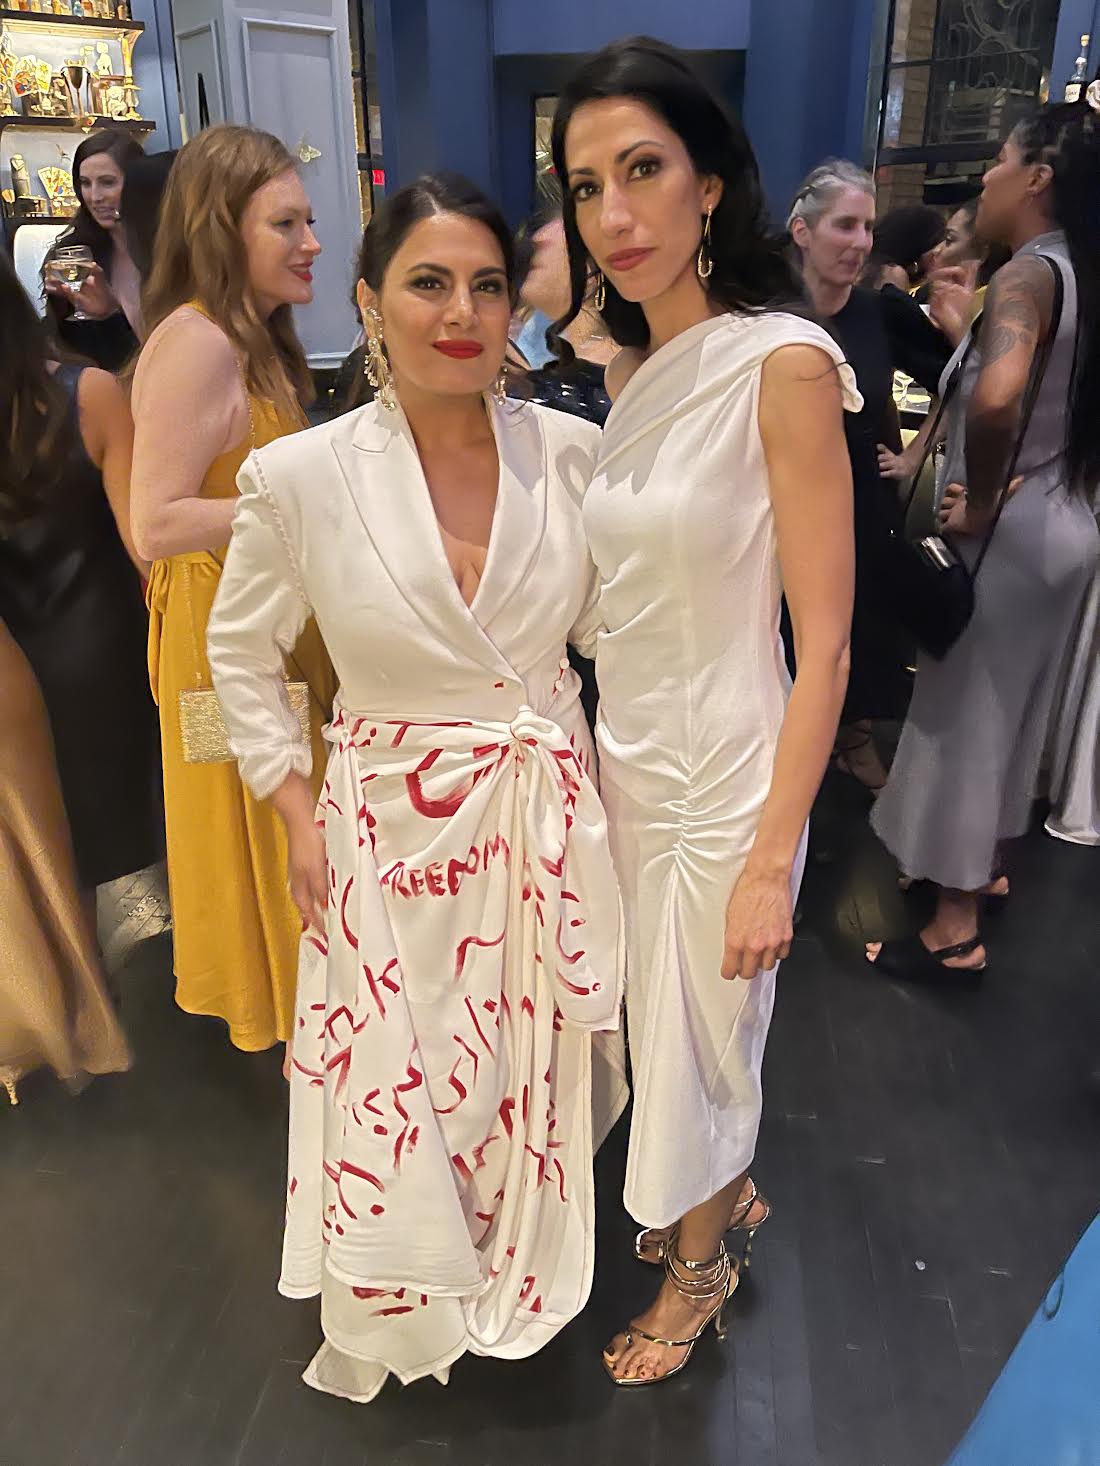 Huma Abedin (right) with Behnaz Ghahramani (left) at the Glamour Awards. Ghahramani styled by Engie Hassan in Zaid Farouki couture to Honor Iranian Women